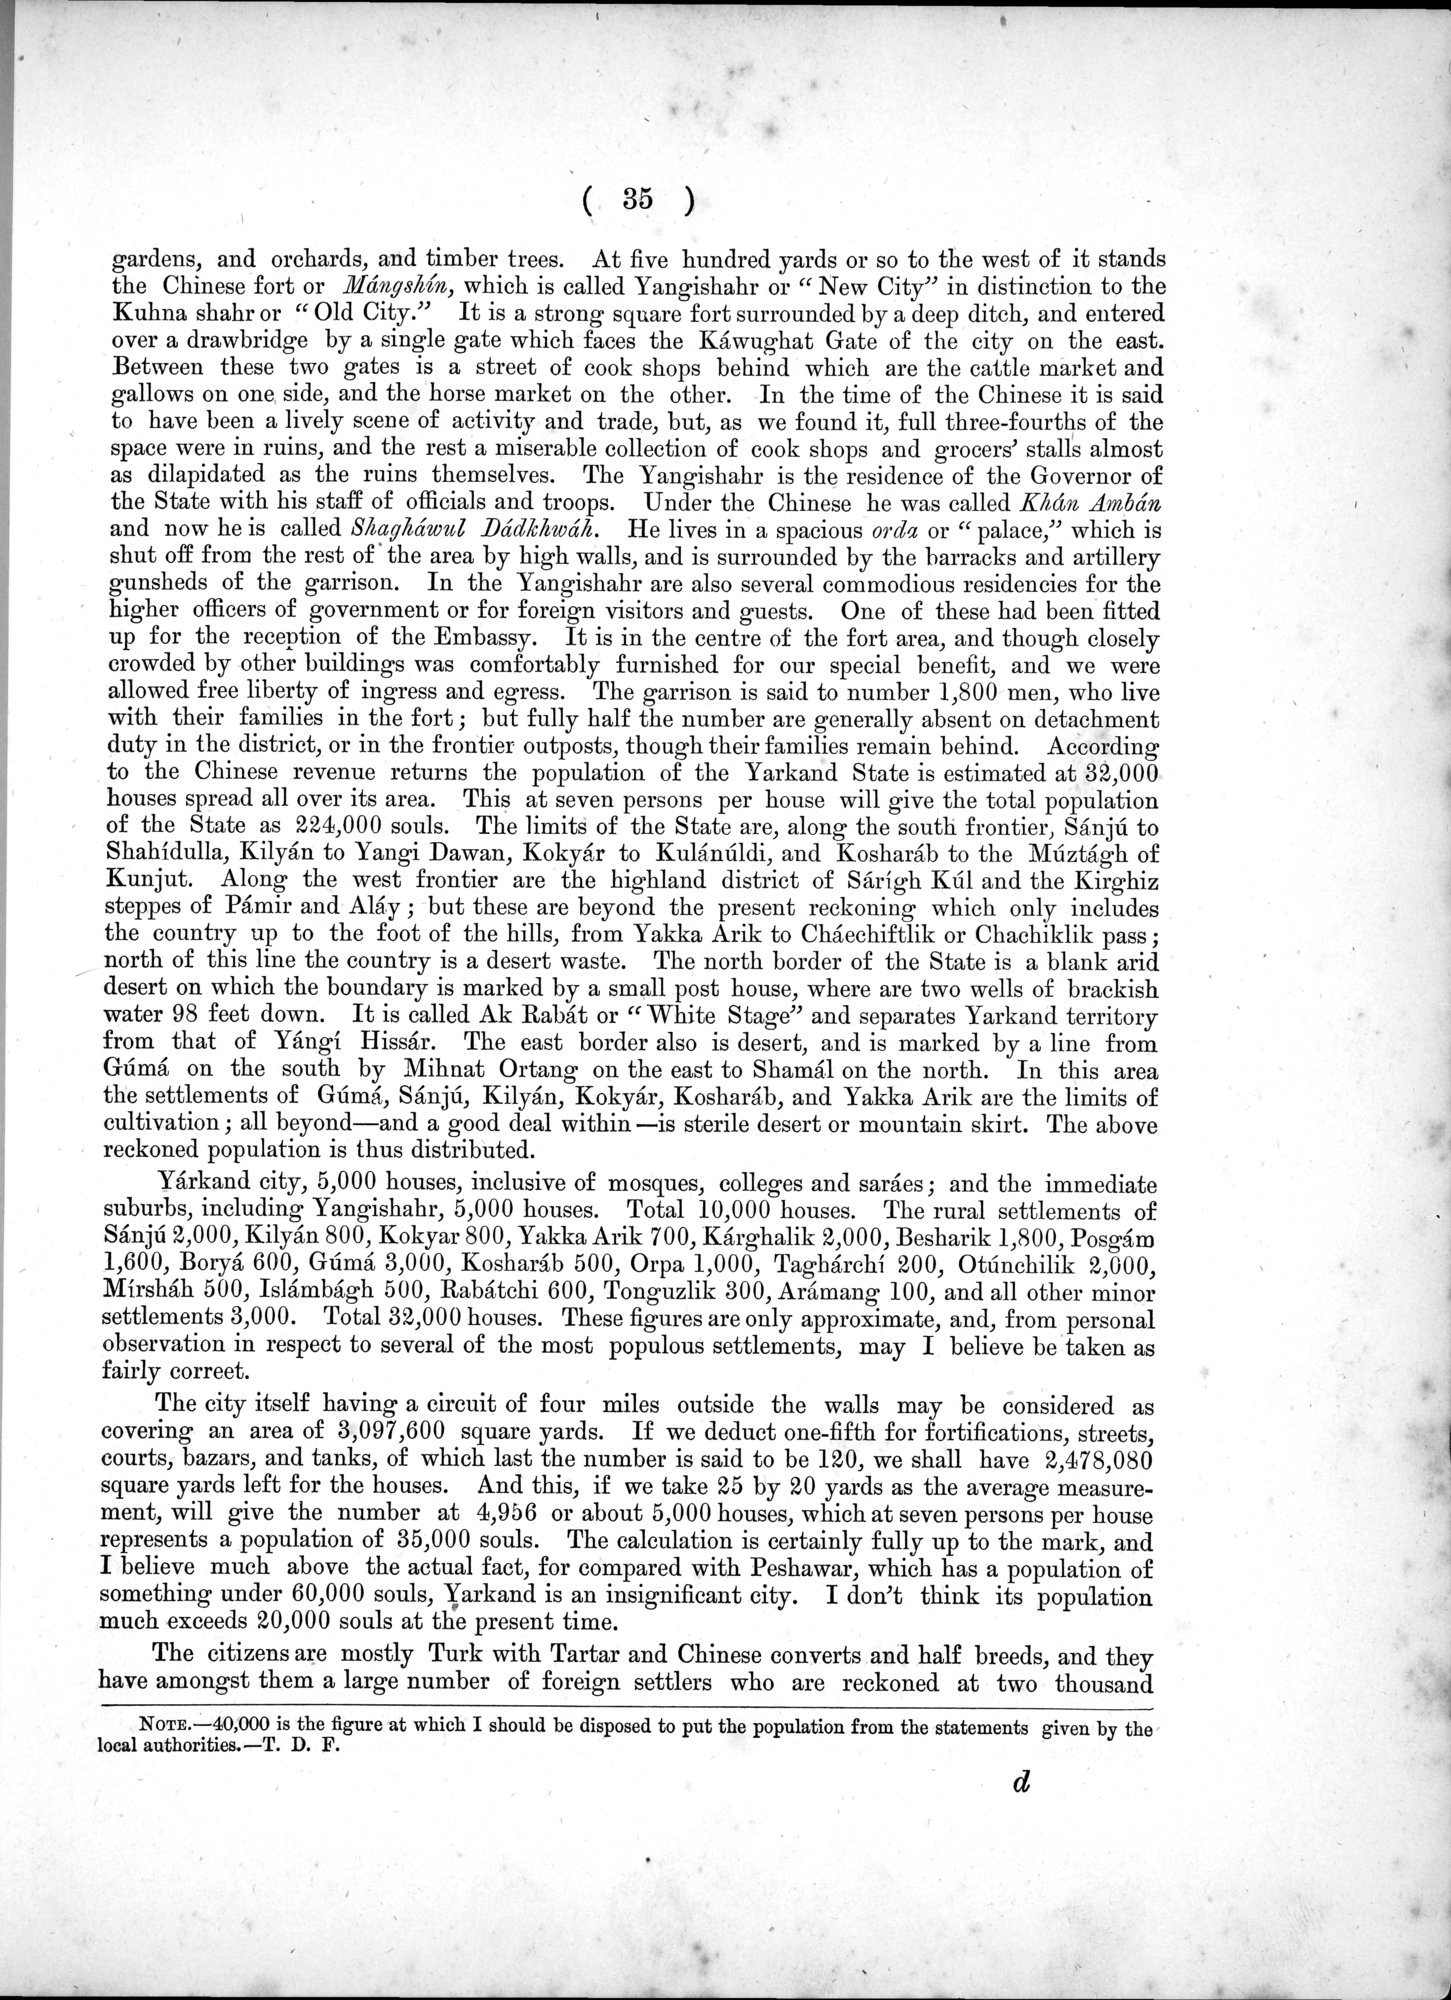 Report of a Mission to Yarkund in 1873 : vol.1 / Page 69 (Grayscale High Resolution Image)